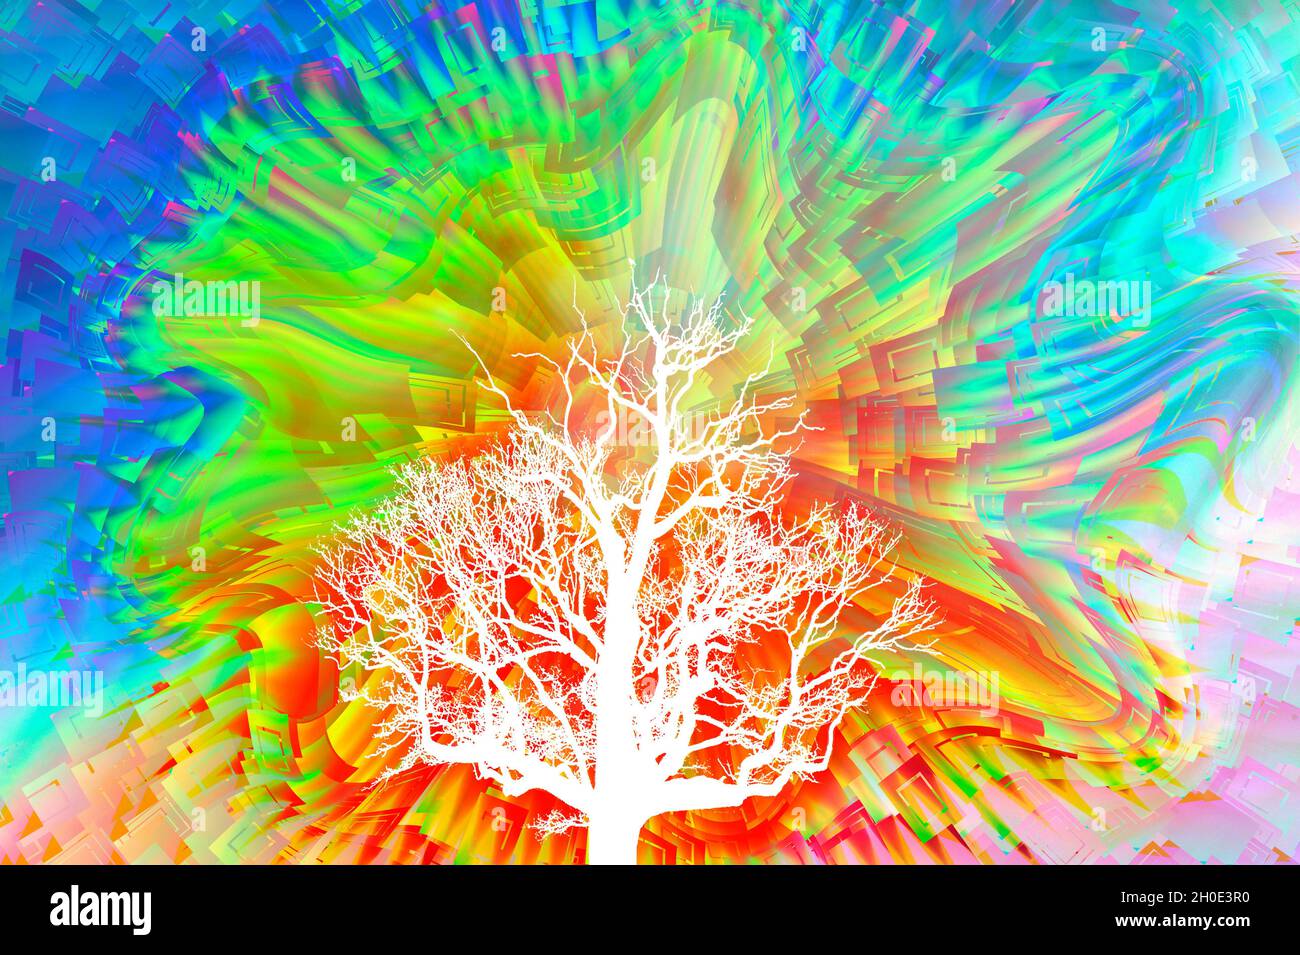 tree of life with a colorful abstract background Stock Photo